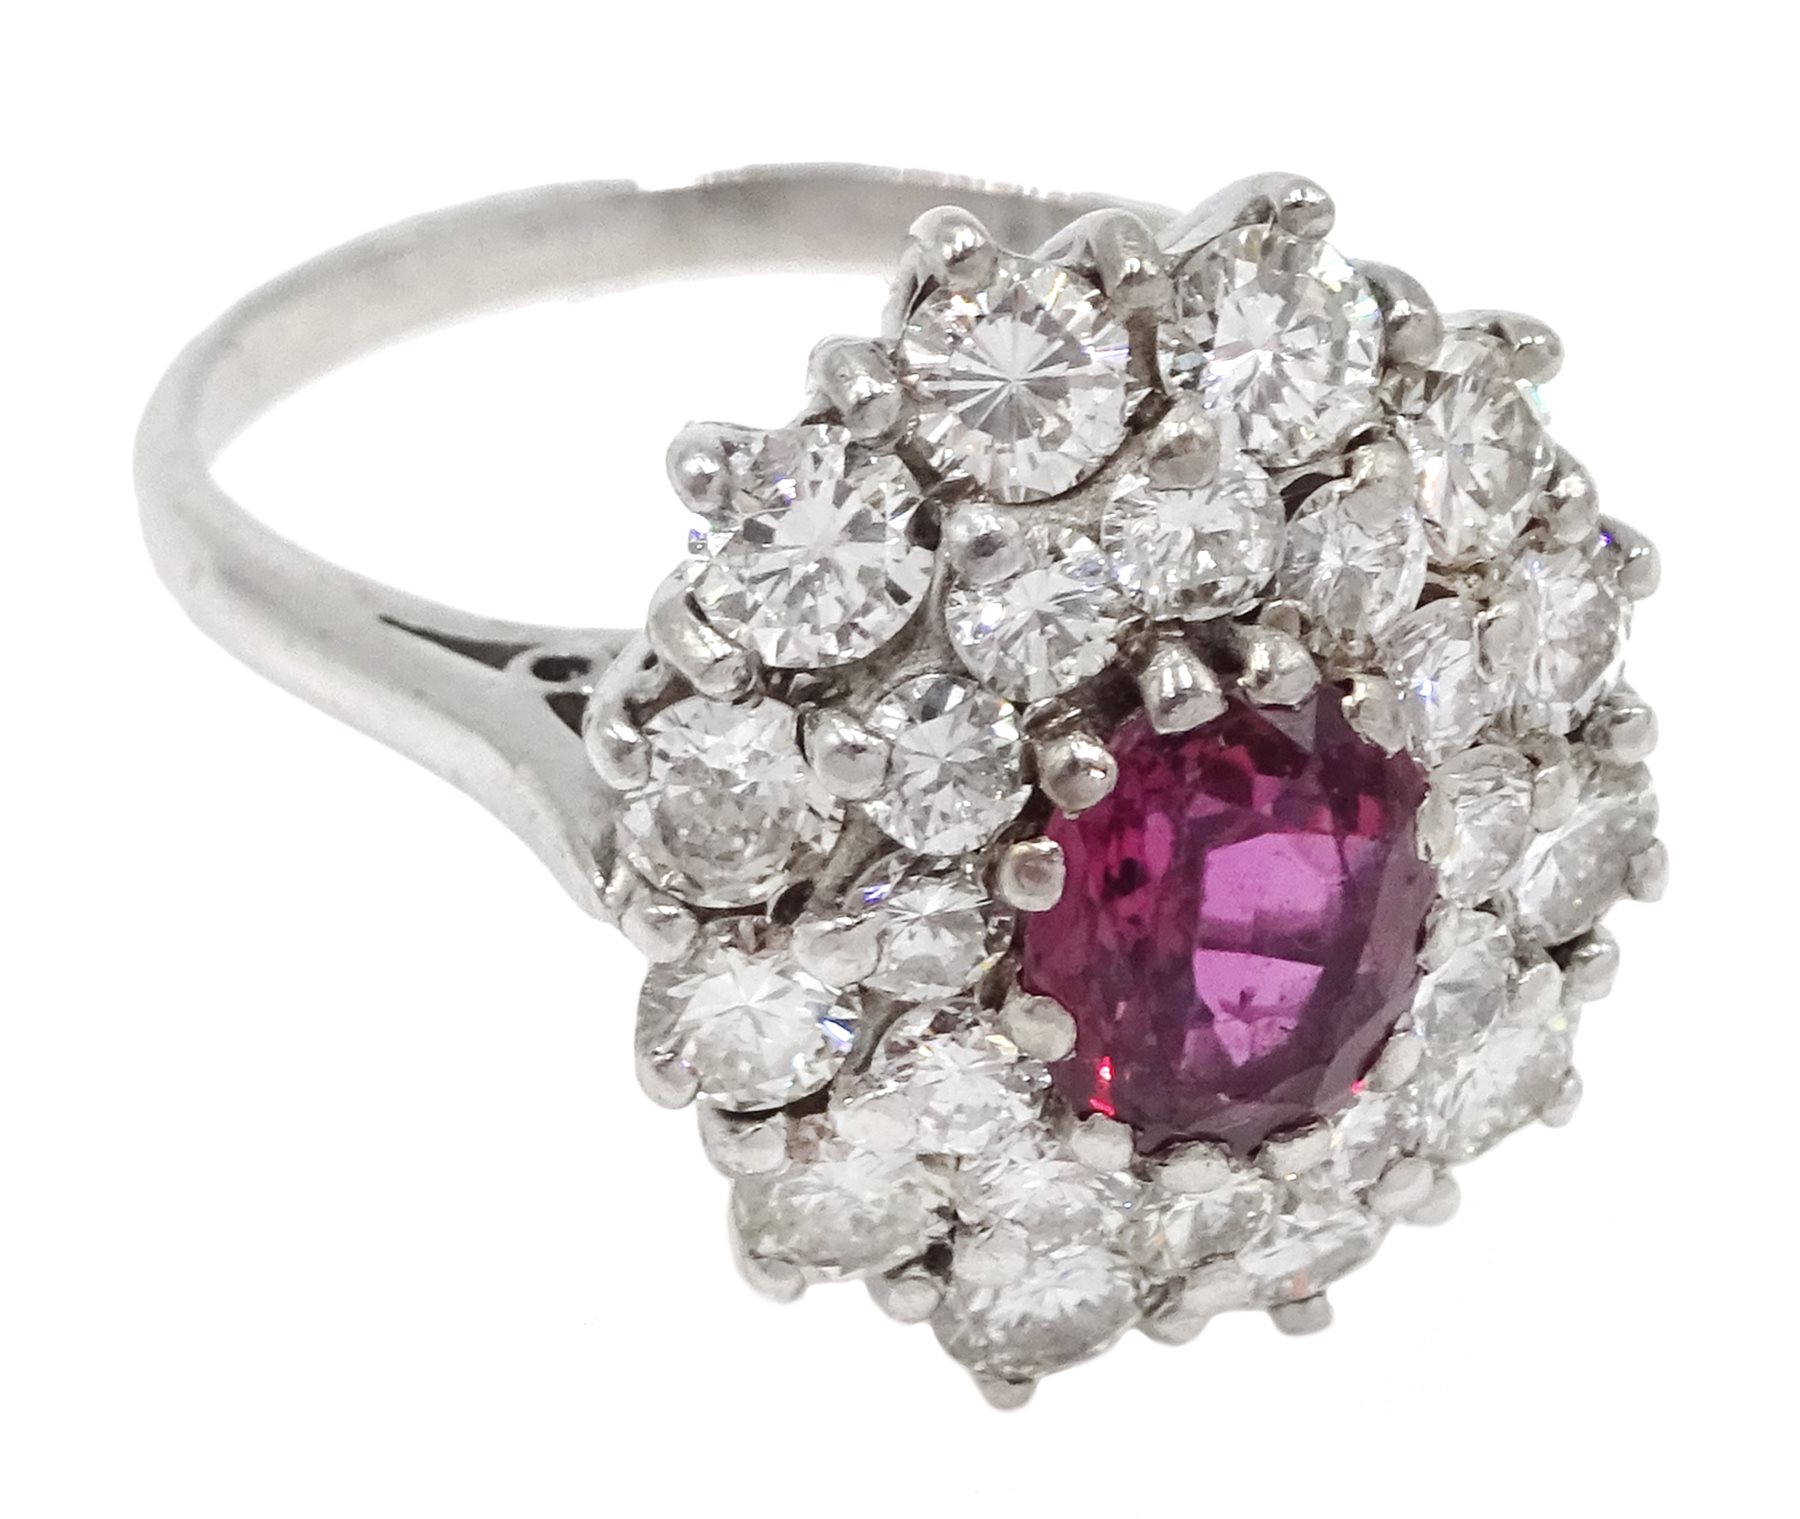 18ct white gold oval ruby and two row, round brilliant cut diamond ring [image code: 4mc] - Image 3 of 4